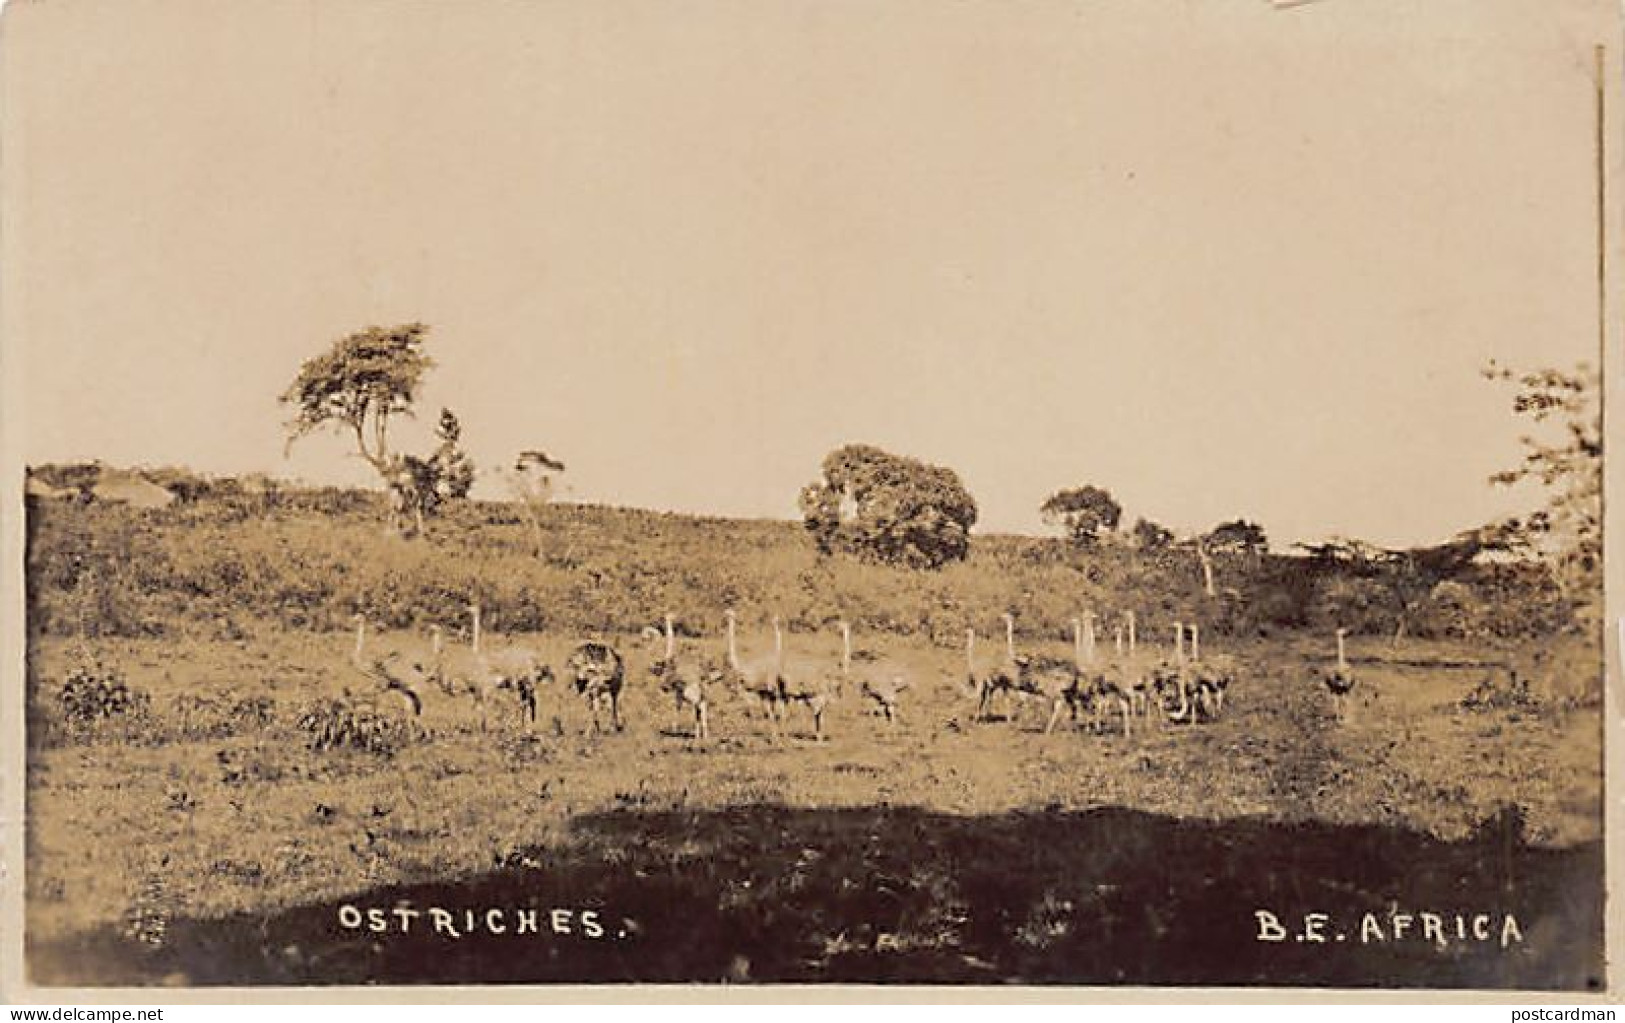 British East Africa - Ostriches - REAL PHOTO - Publ. Unknown  - Kenia